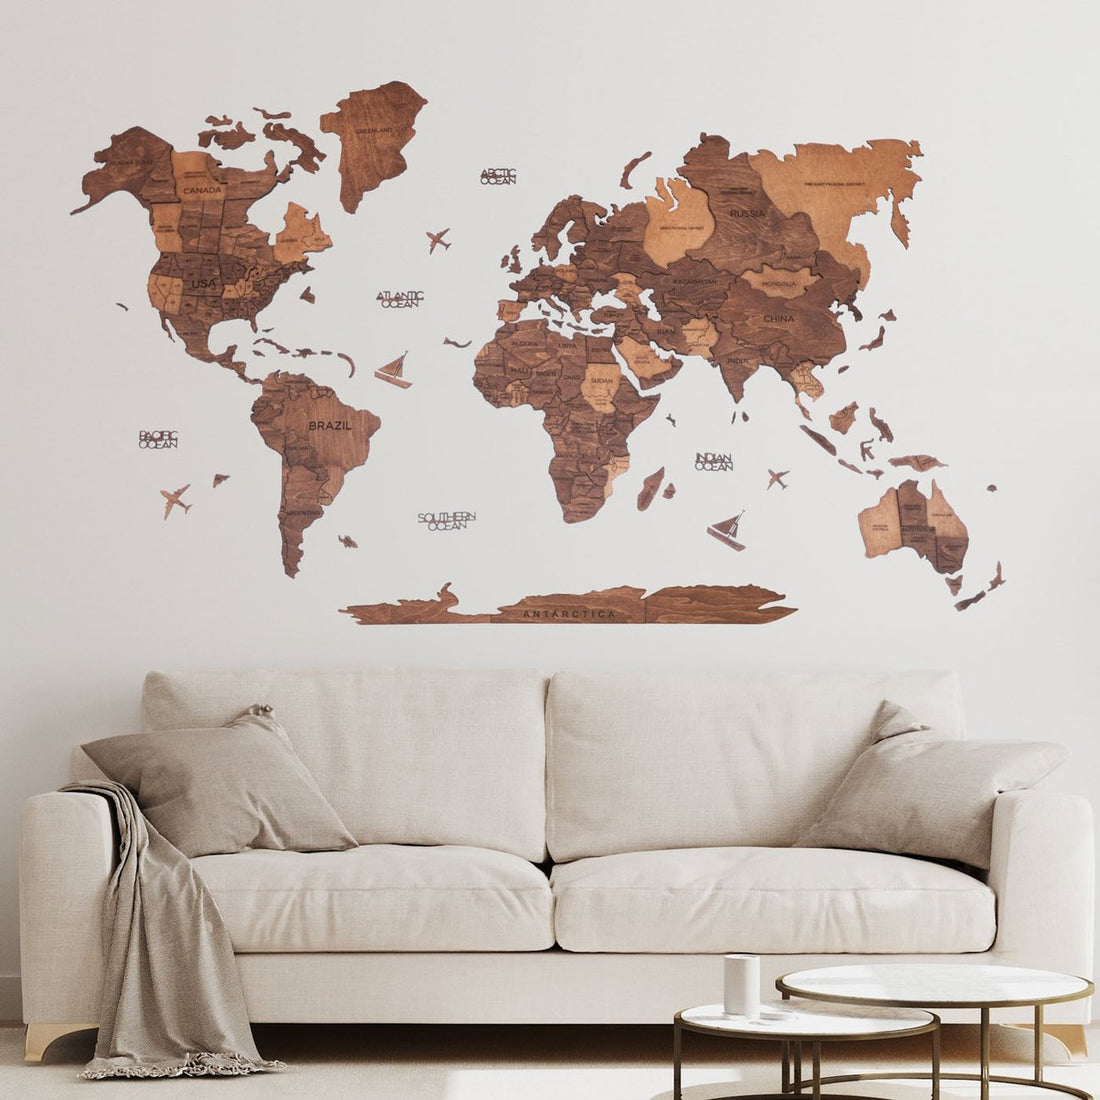 3D Wooden World Map in Oak Color in a Living Room